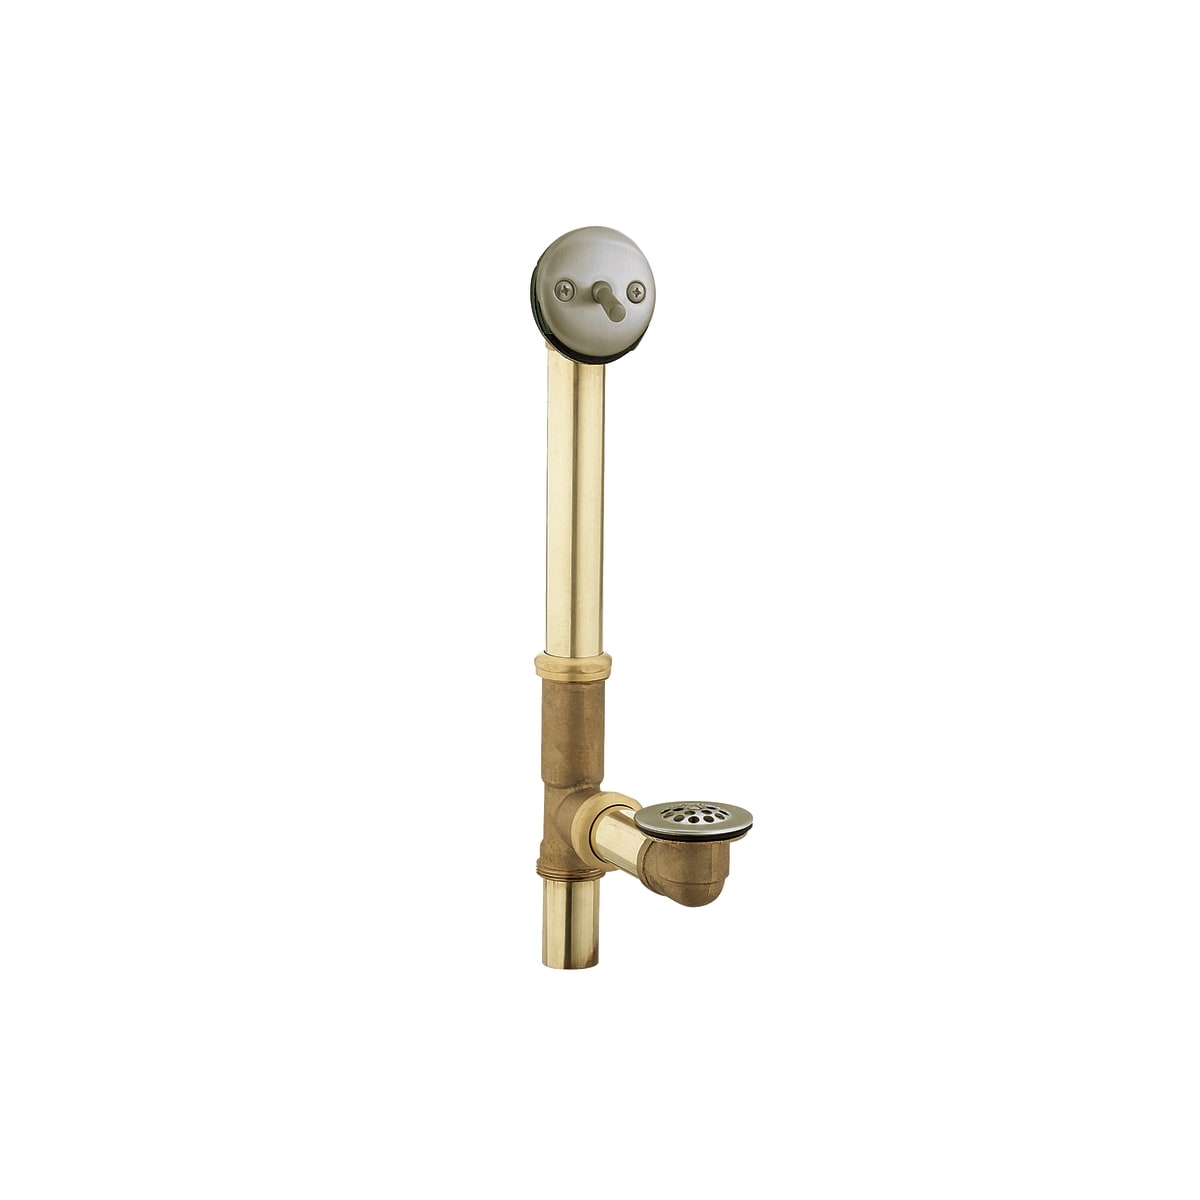 Moen 90410bn Tub Drain With Brass, Bathtub Trip Lever Replacement Parts